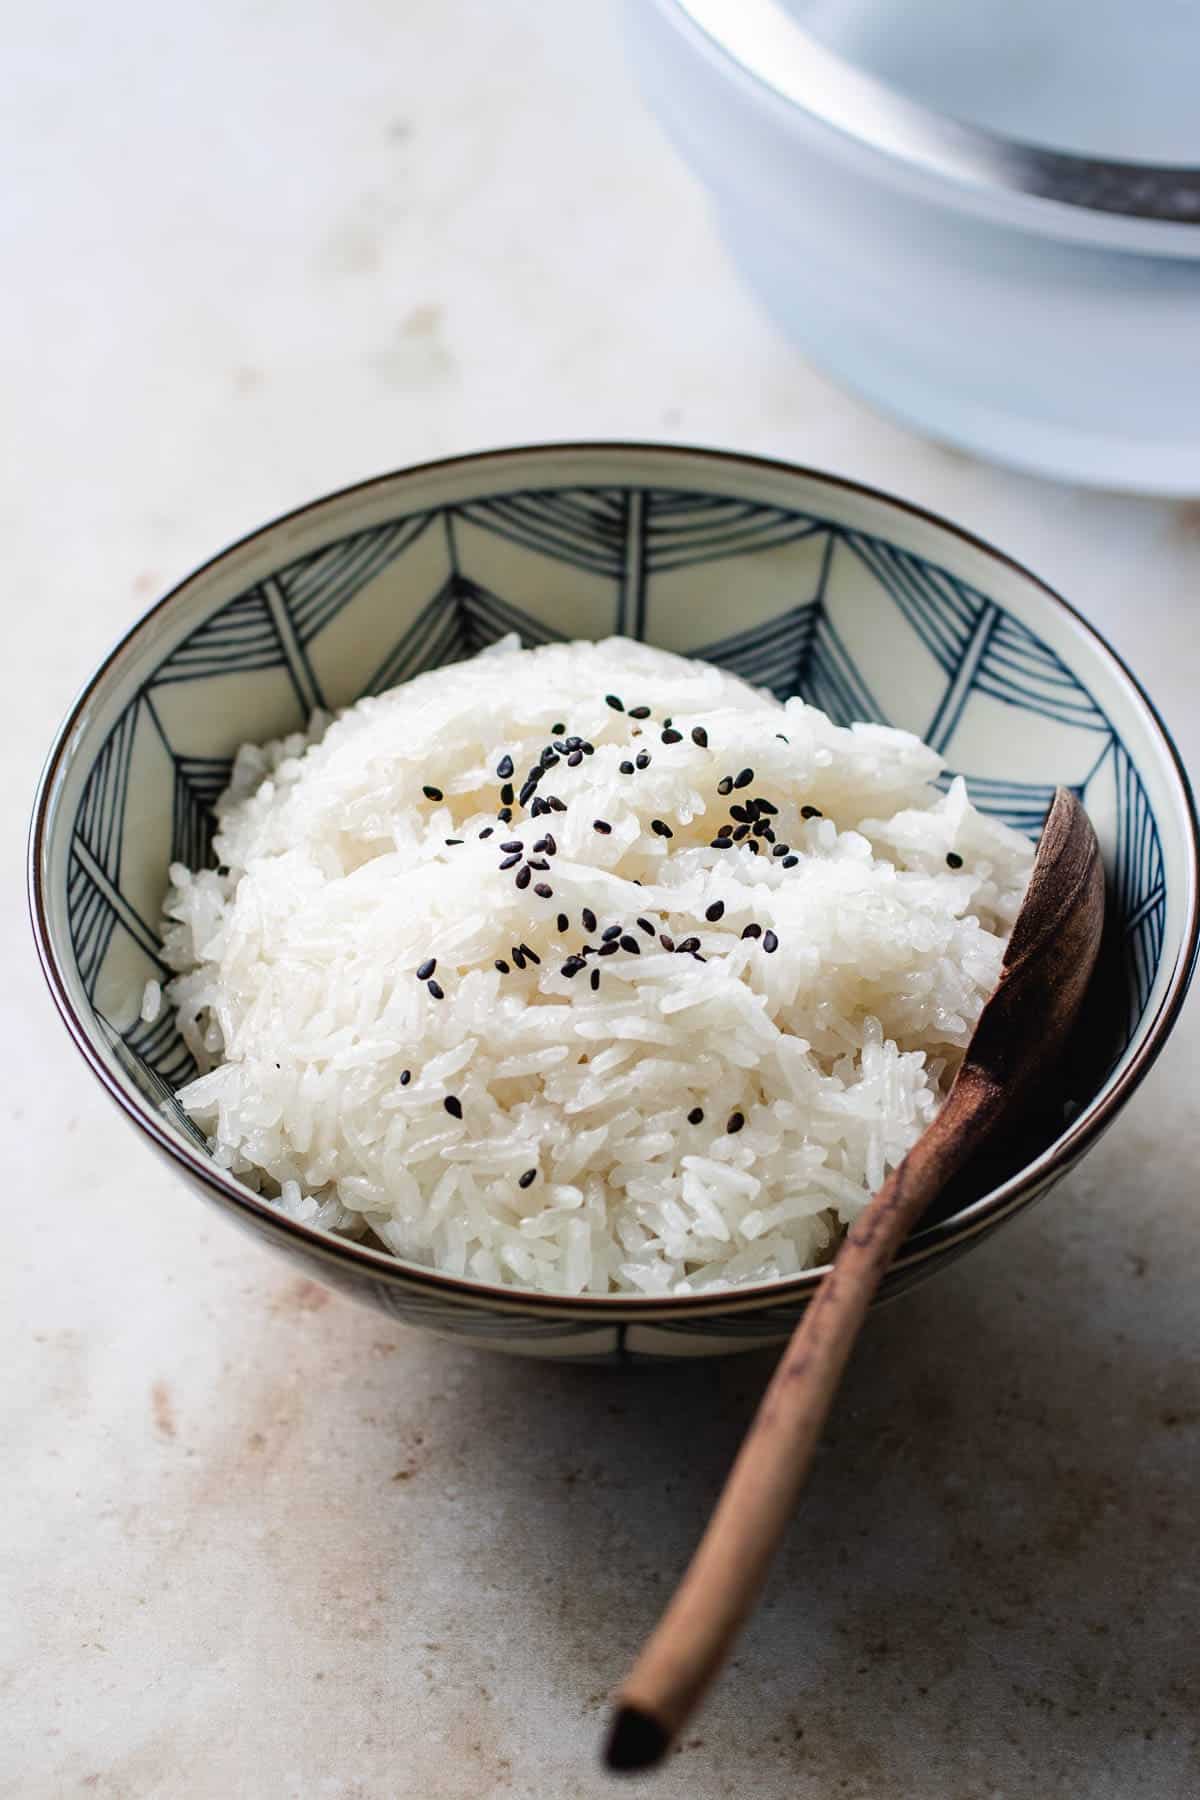 Feature image shows sticky rice made in a microwave.